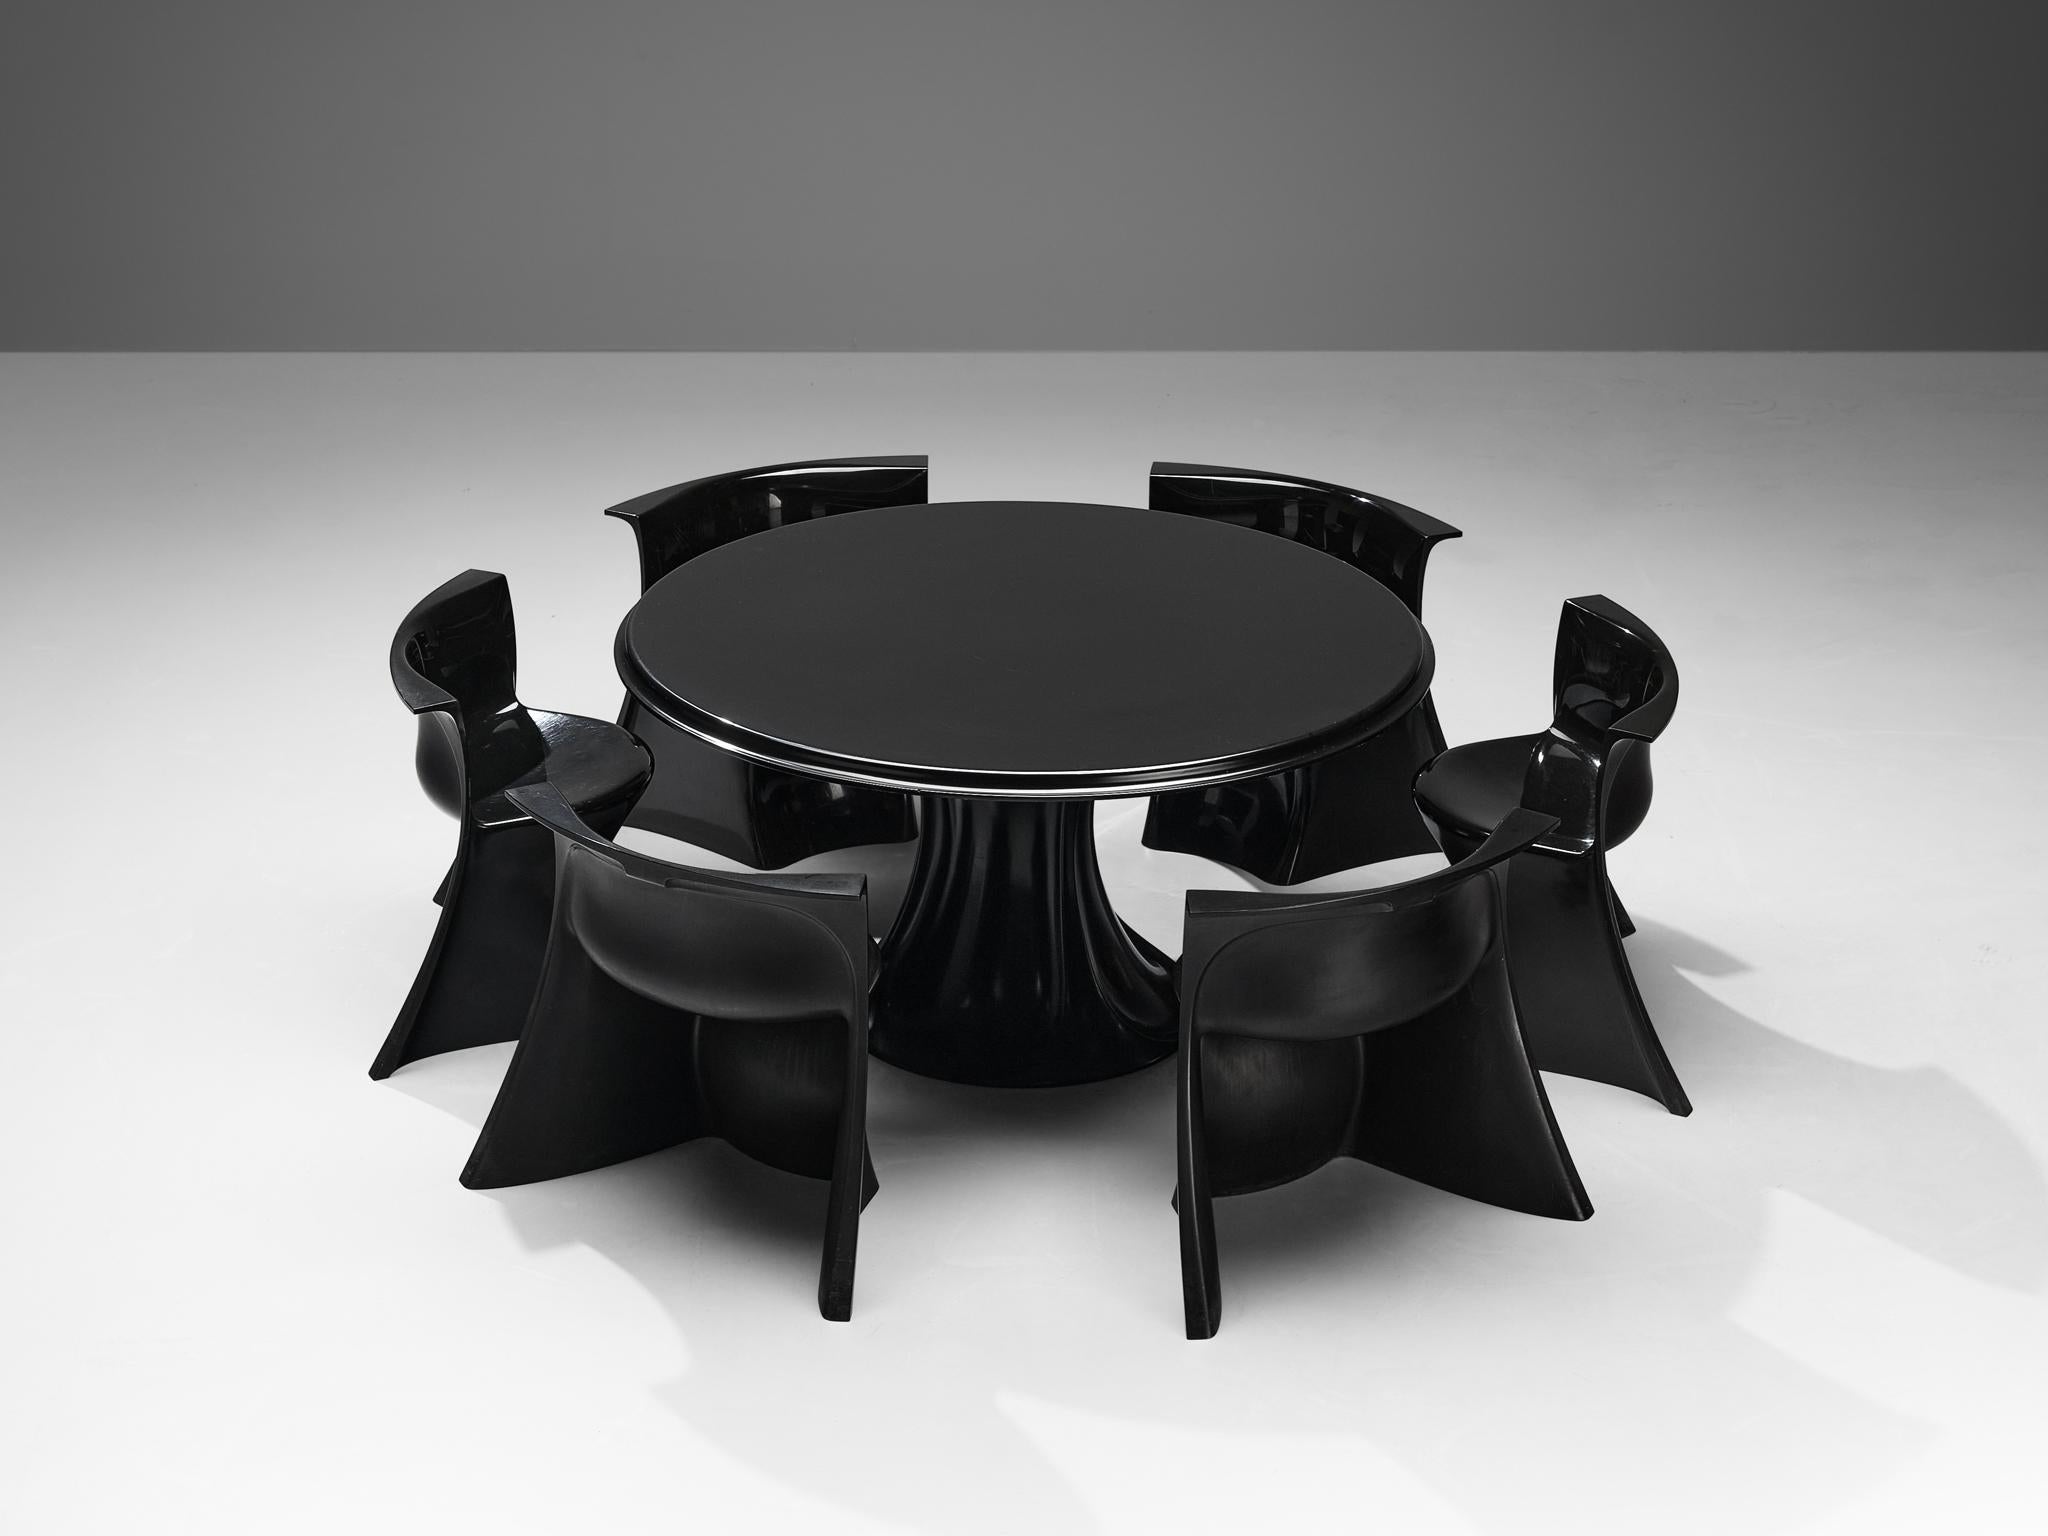 Pierluigi Spadolini for 1P (Permaflex), 'Boccio' dining set with table and six chairs, polyurethane resin, Italy, 1972

This dining set is designed by Italian architect and designer (1922-2000) Pierluigi Spadolini for 1P. In the 1960s and 1970s,